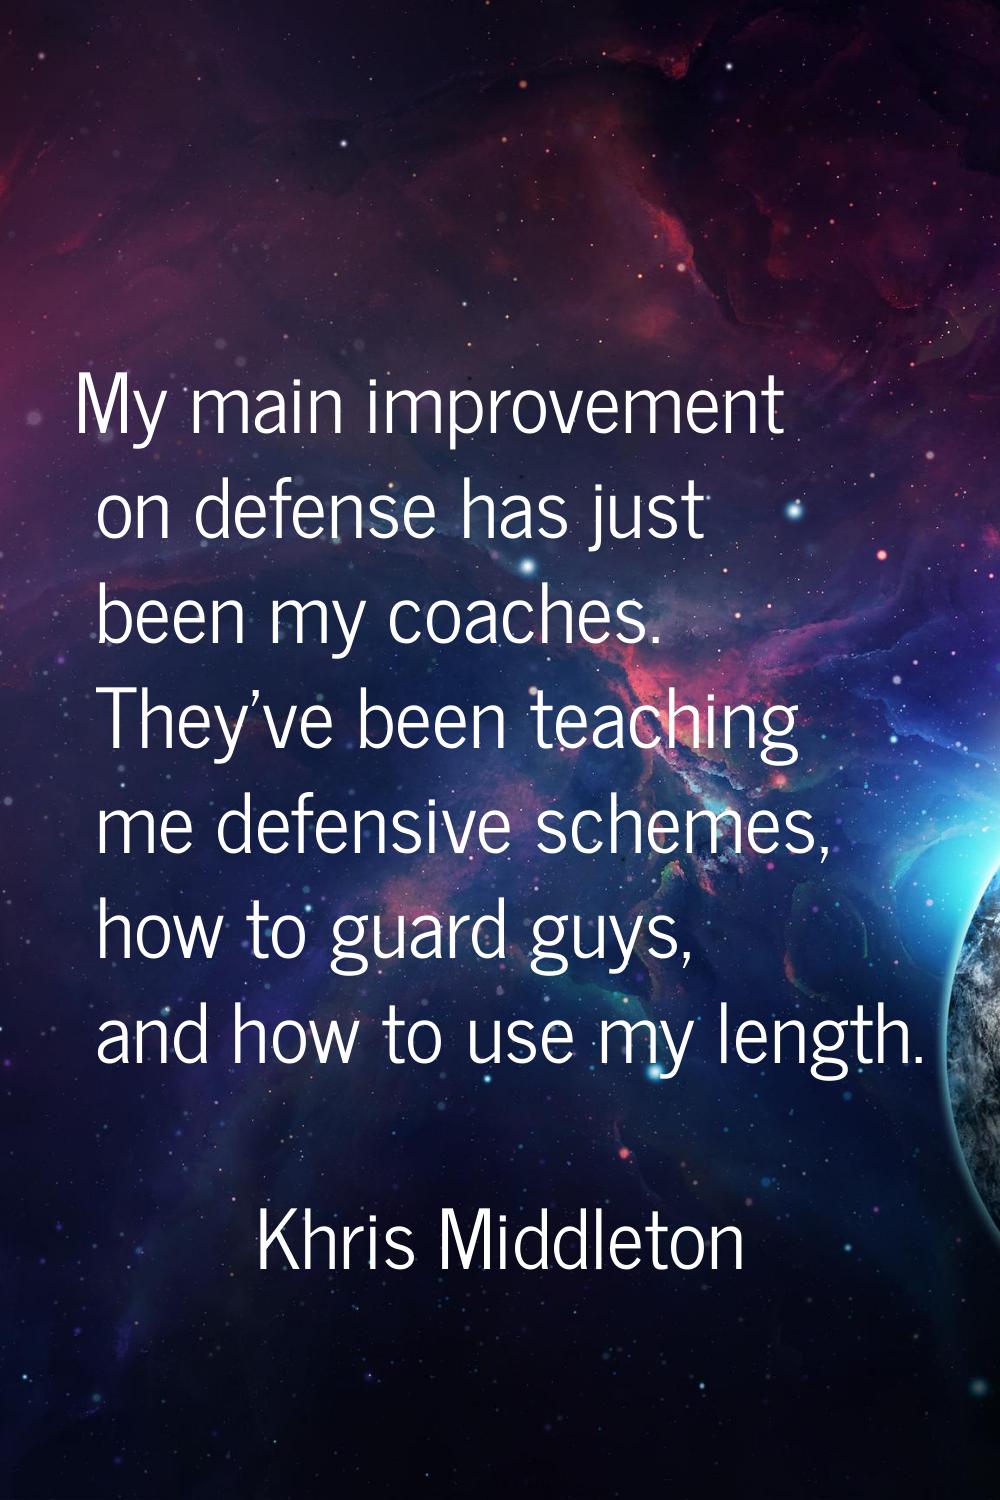 My main improvement on defense has just been my coaches. They've been teaching me defensive schemes